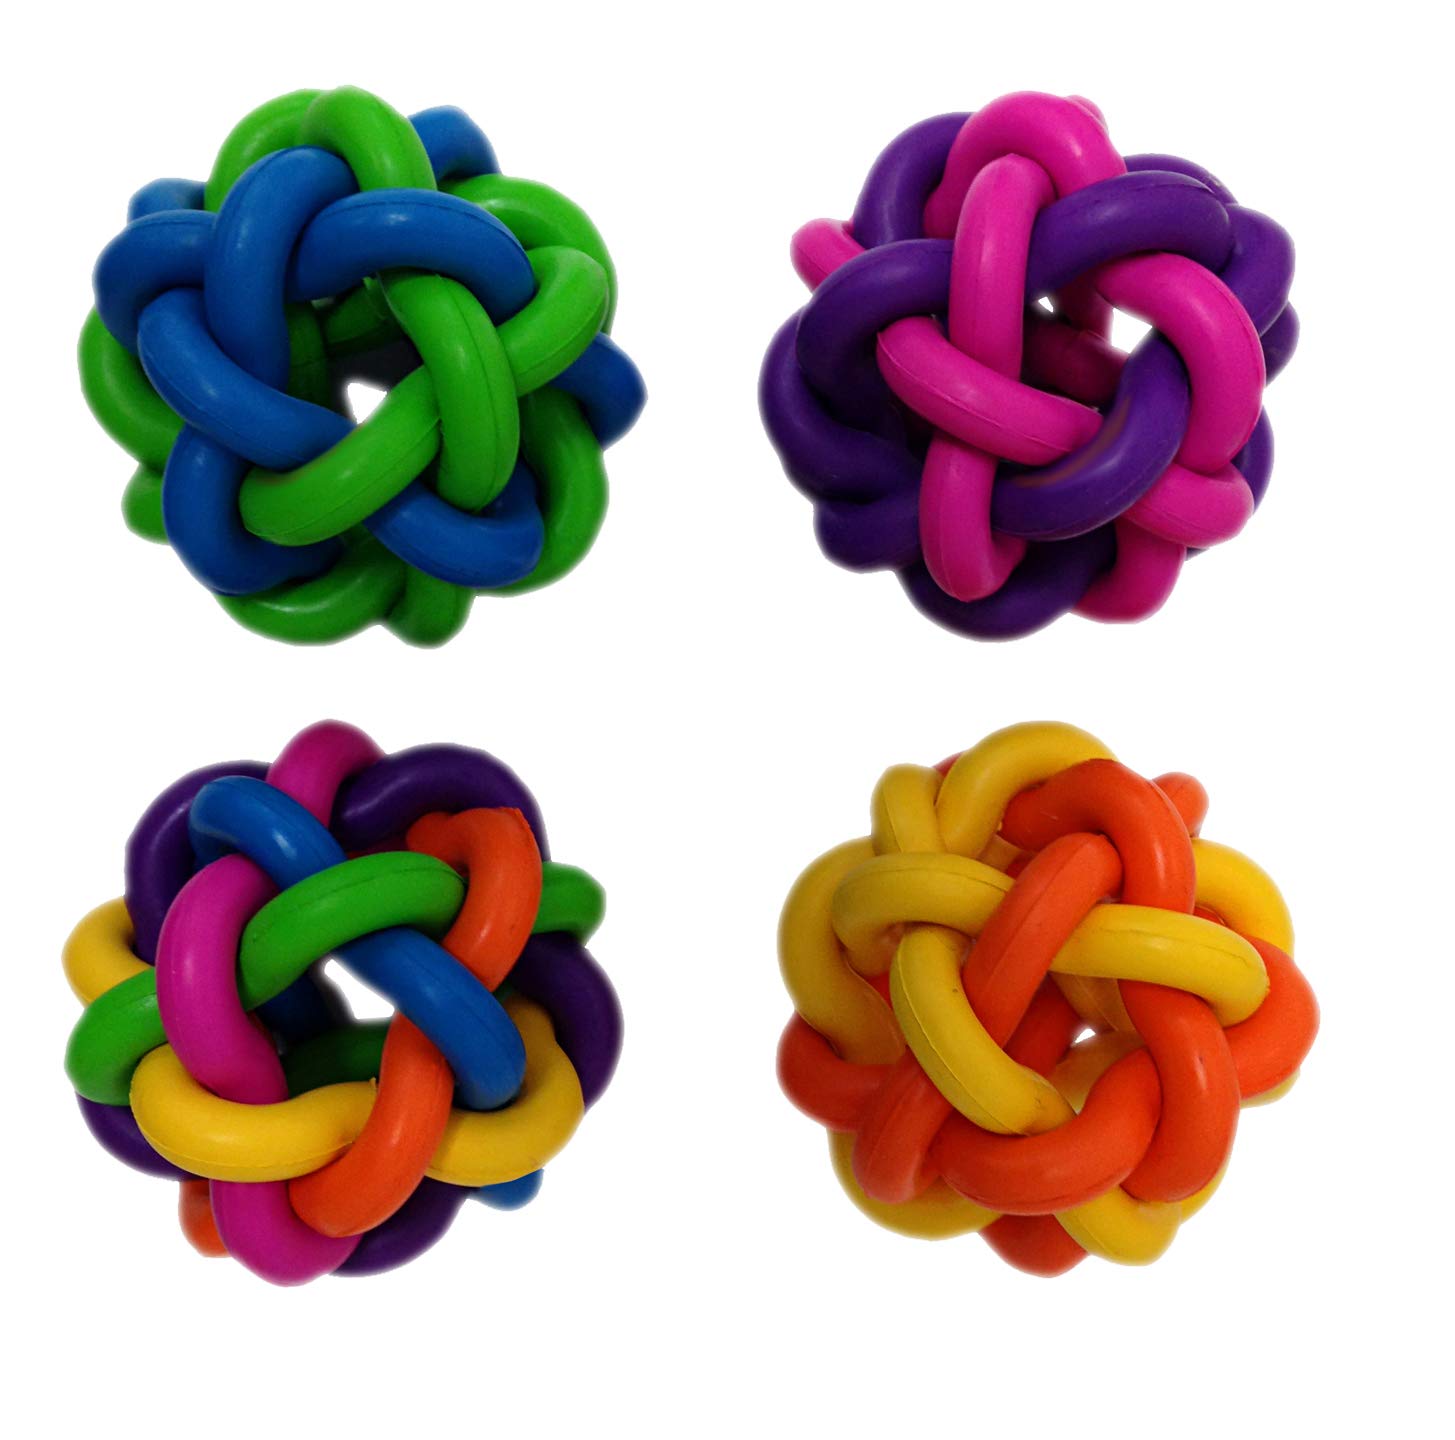 Multipet Nobbly Wobbly Multi-Colored Ball Rubber Dog Toy - Large - 4